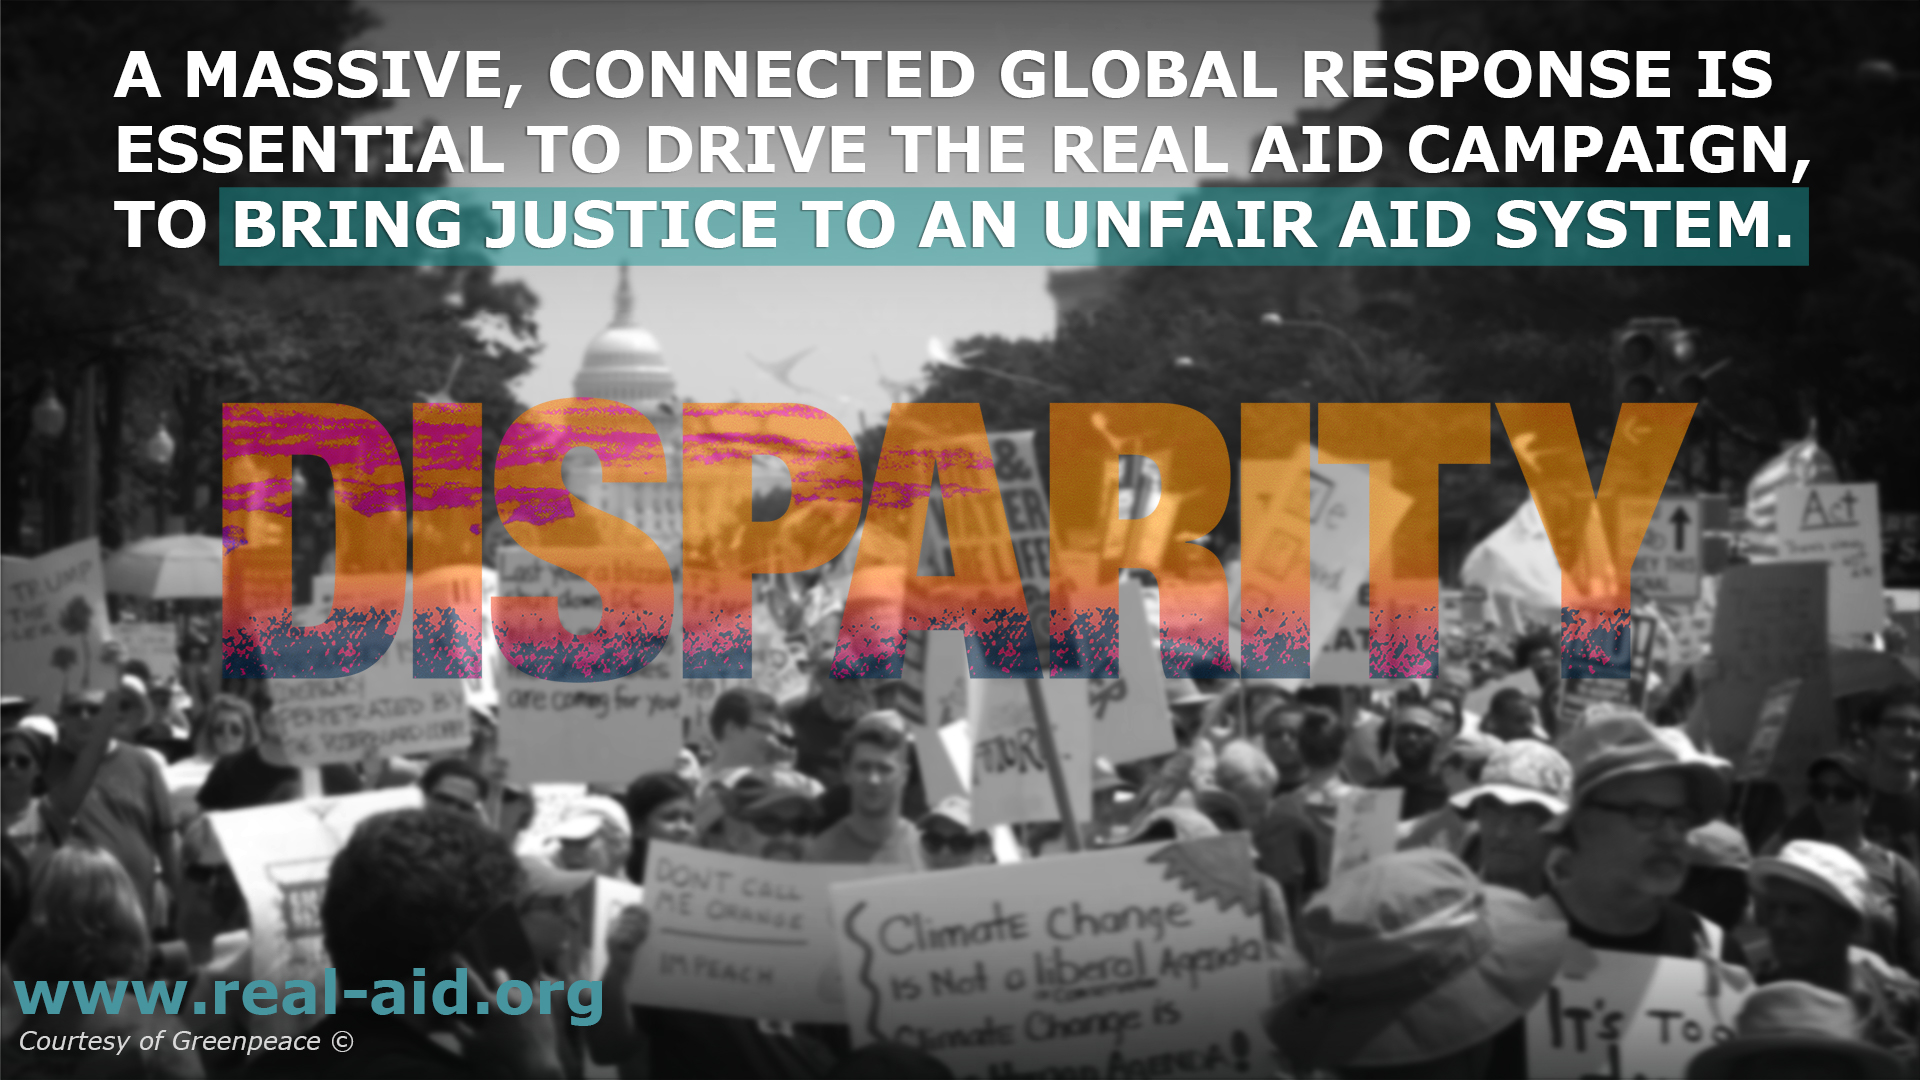 Disparity poster, Bring Justice to an unfair aid system text, protest in washington dc image